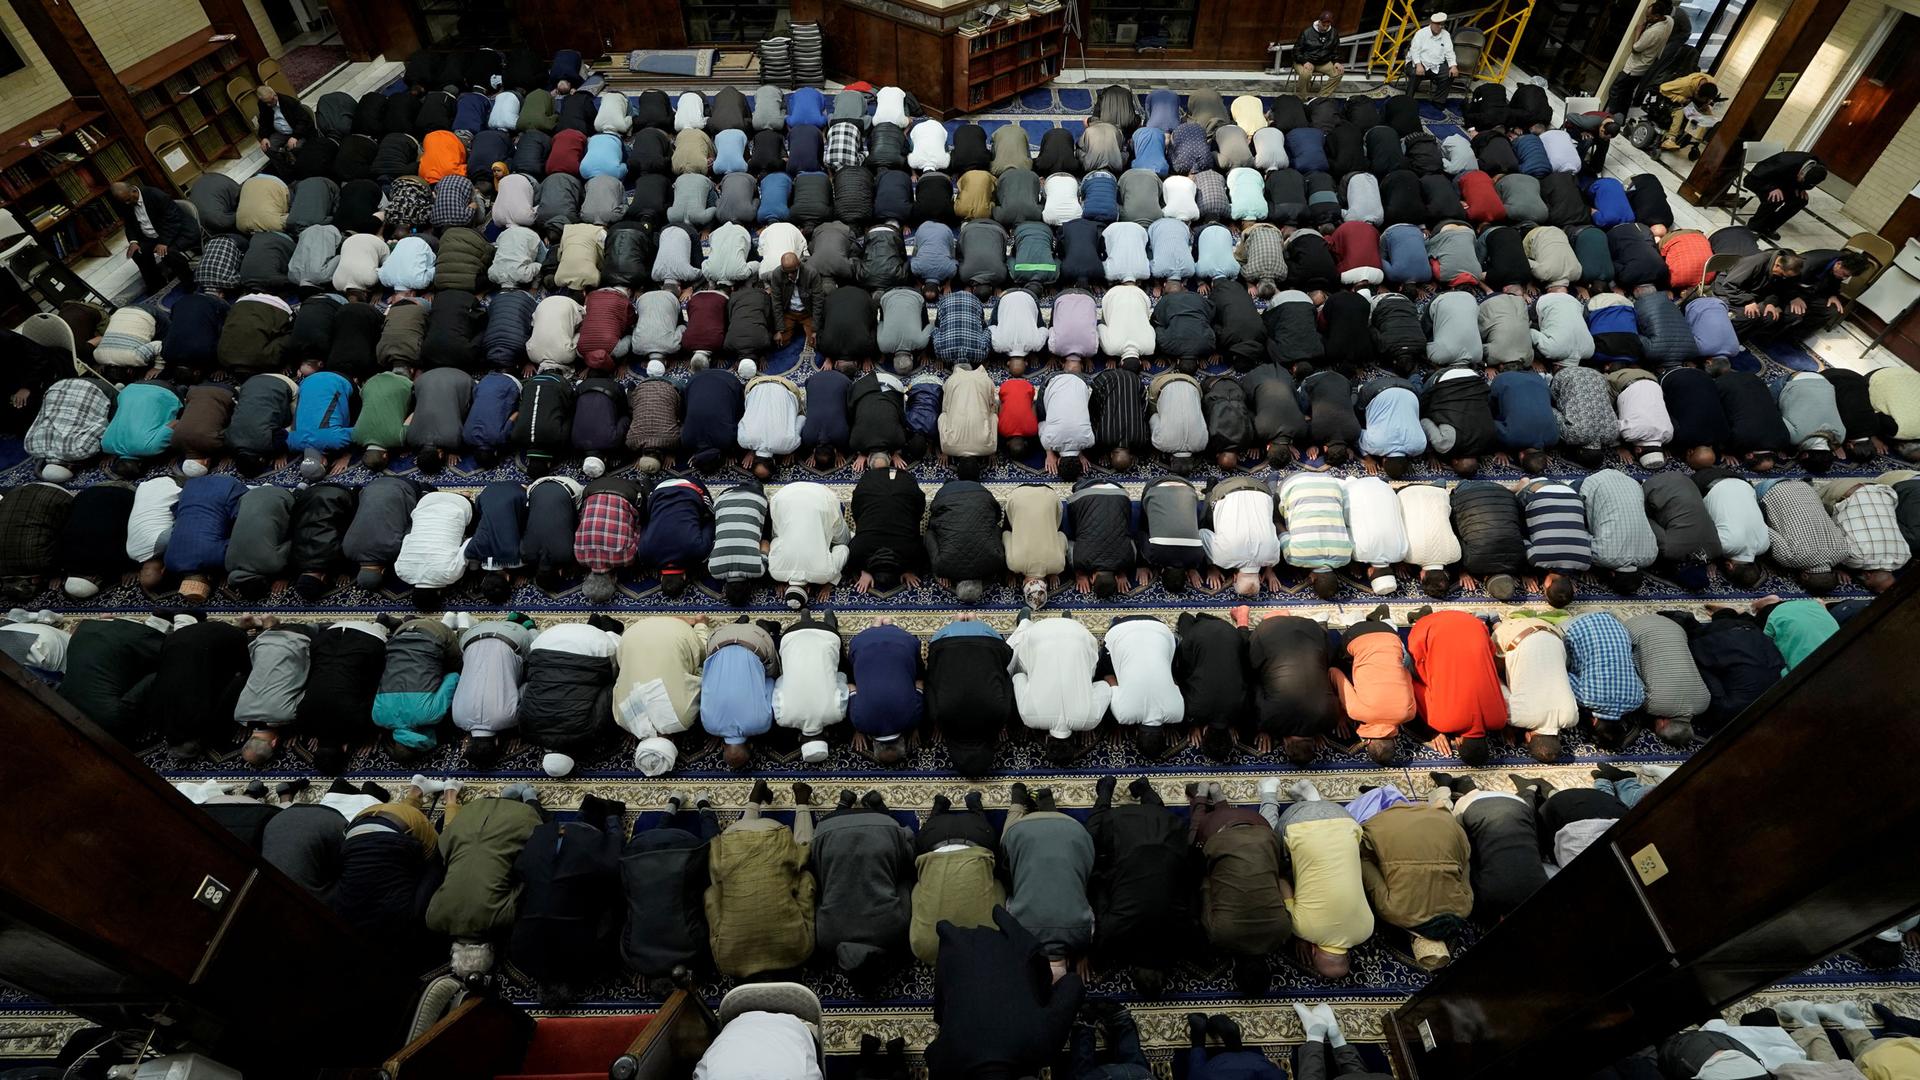 A photo taken overhead shows dozens of Muslims praying in a mosque